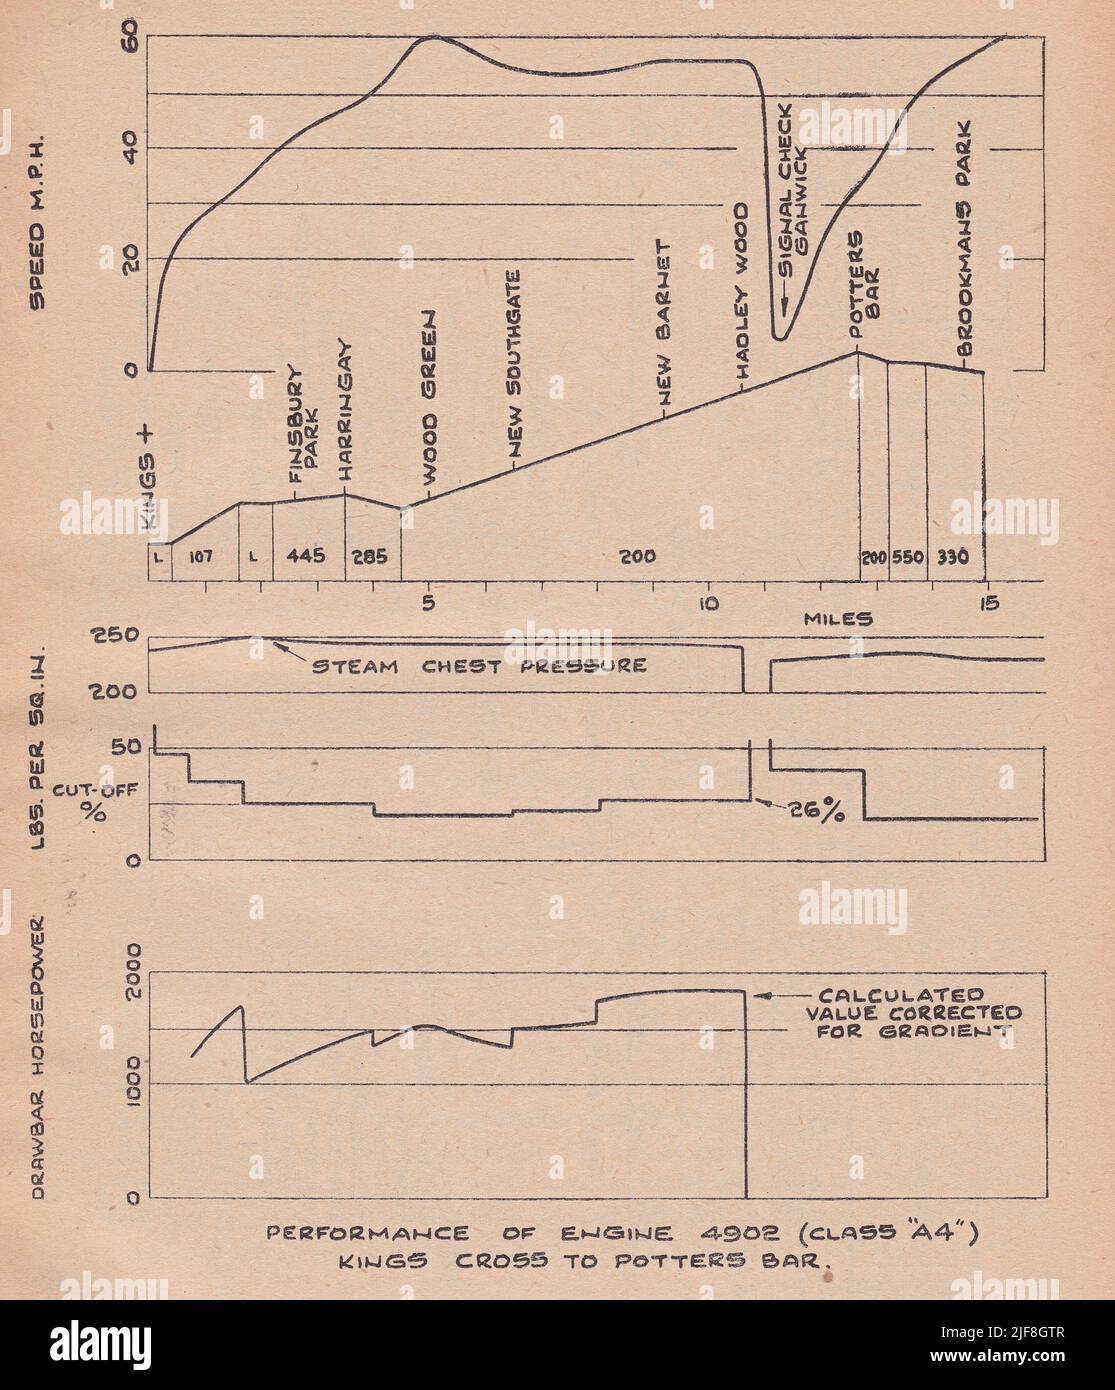 Vintage graph of Performance of Engine 4902 (Class A4) King's Cross to Potter's Bar. Stock Photo